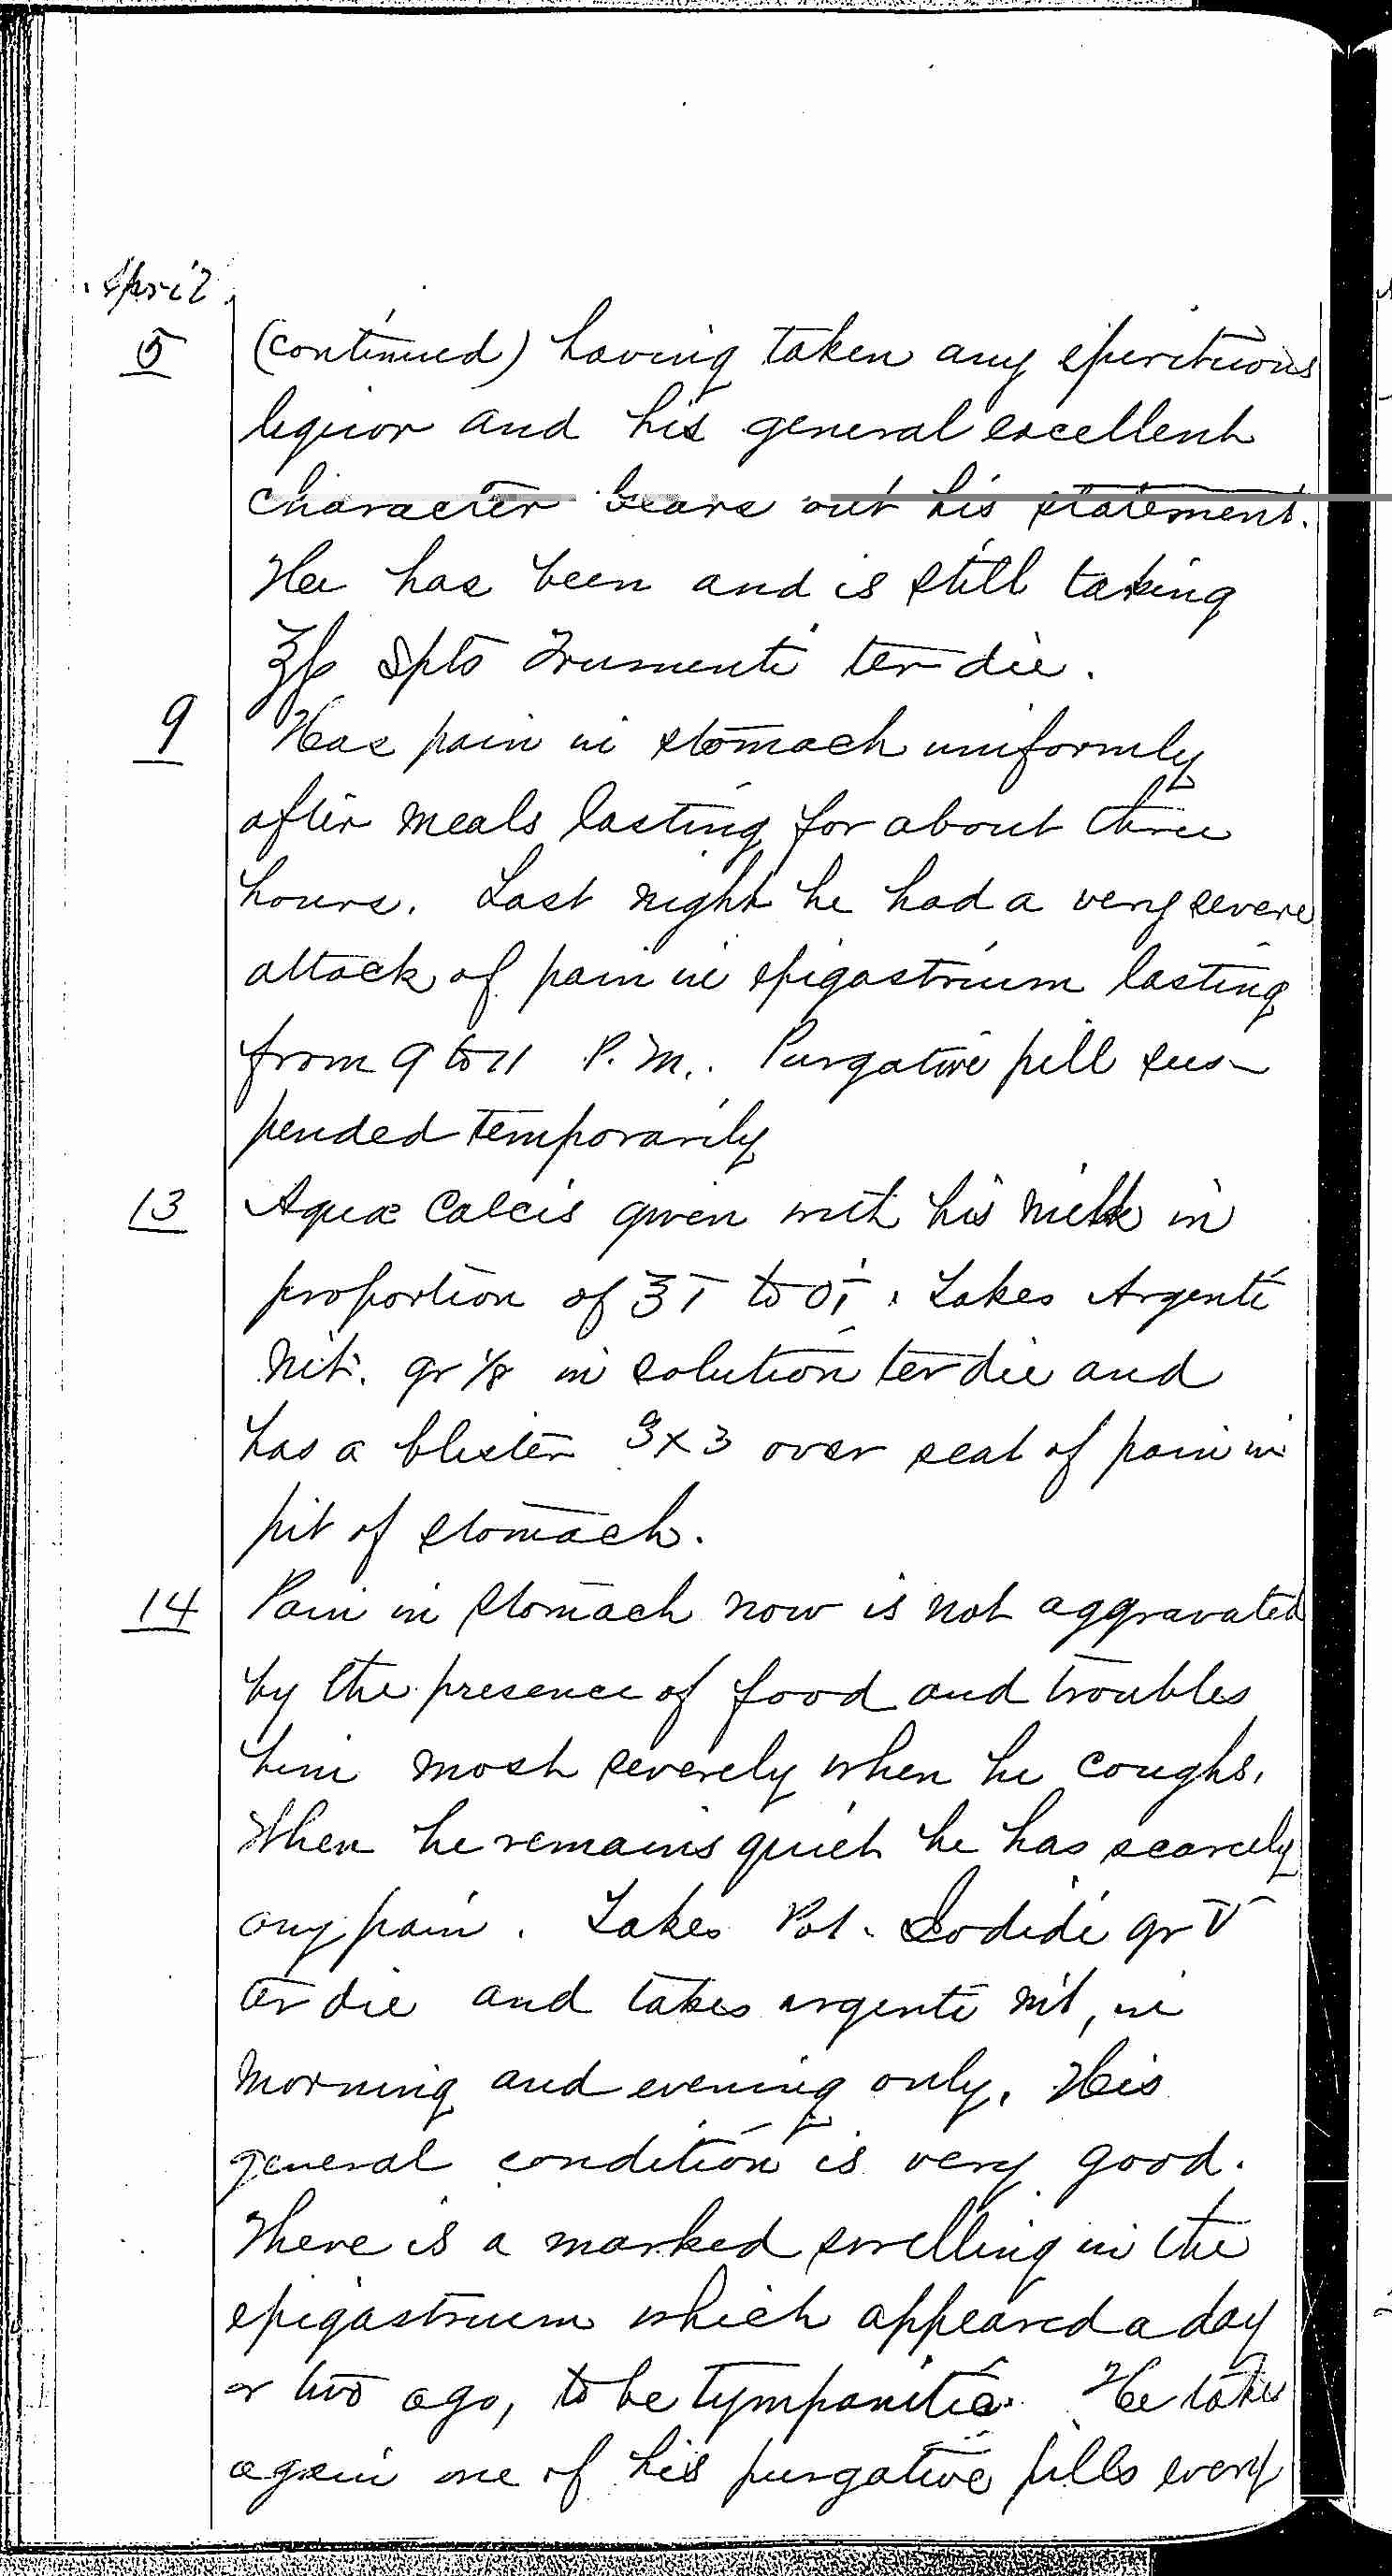 Entry for Charles Johnson (page 10 of 15) in the log Hospital Tickets and Case Papers - Naval Hospital - Washington, D.C. - 1868-69